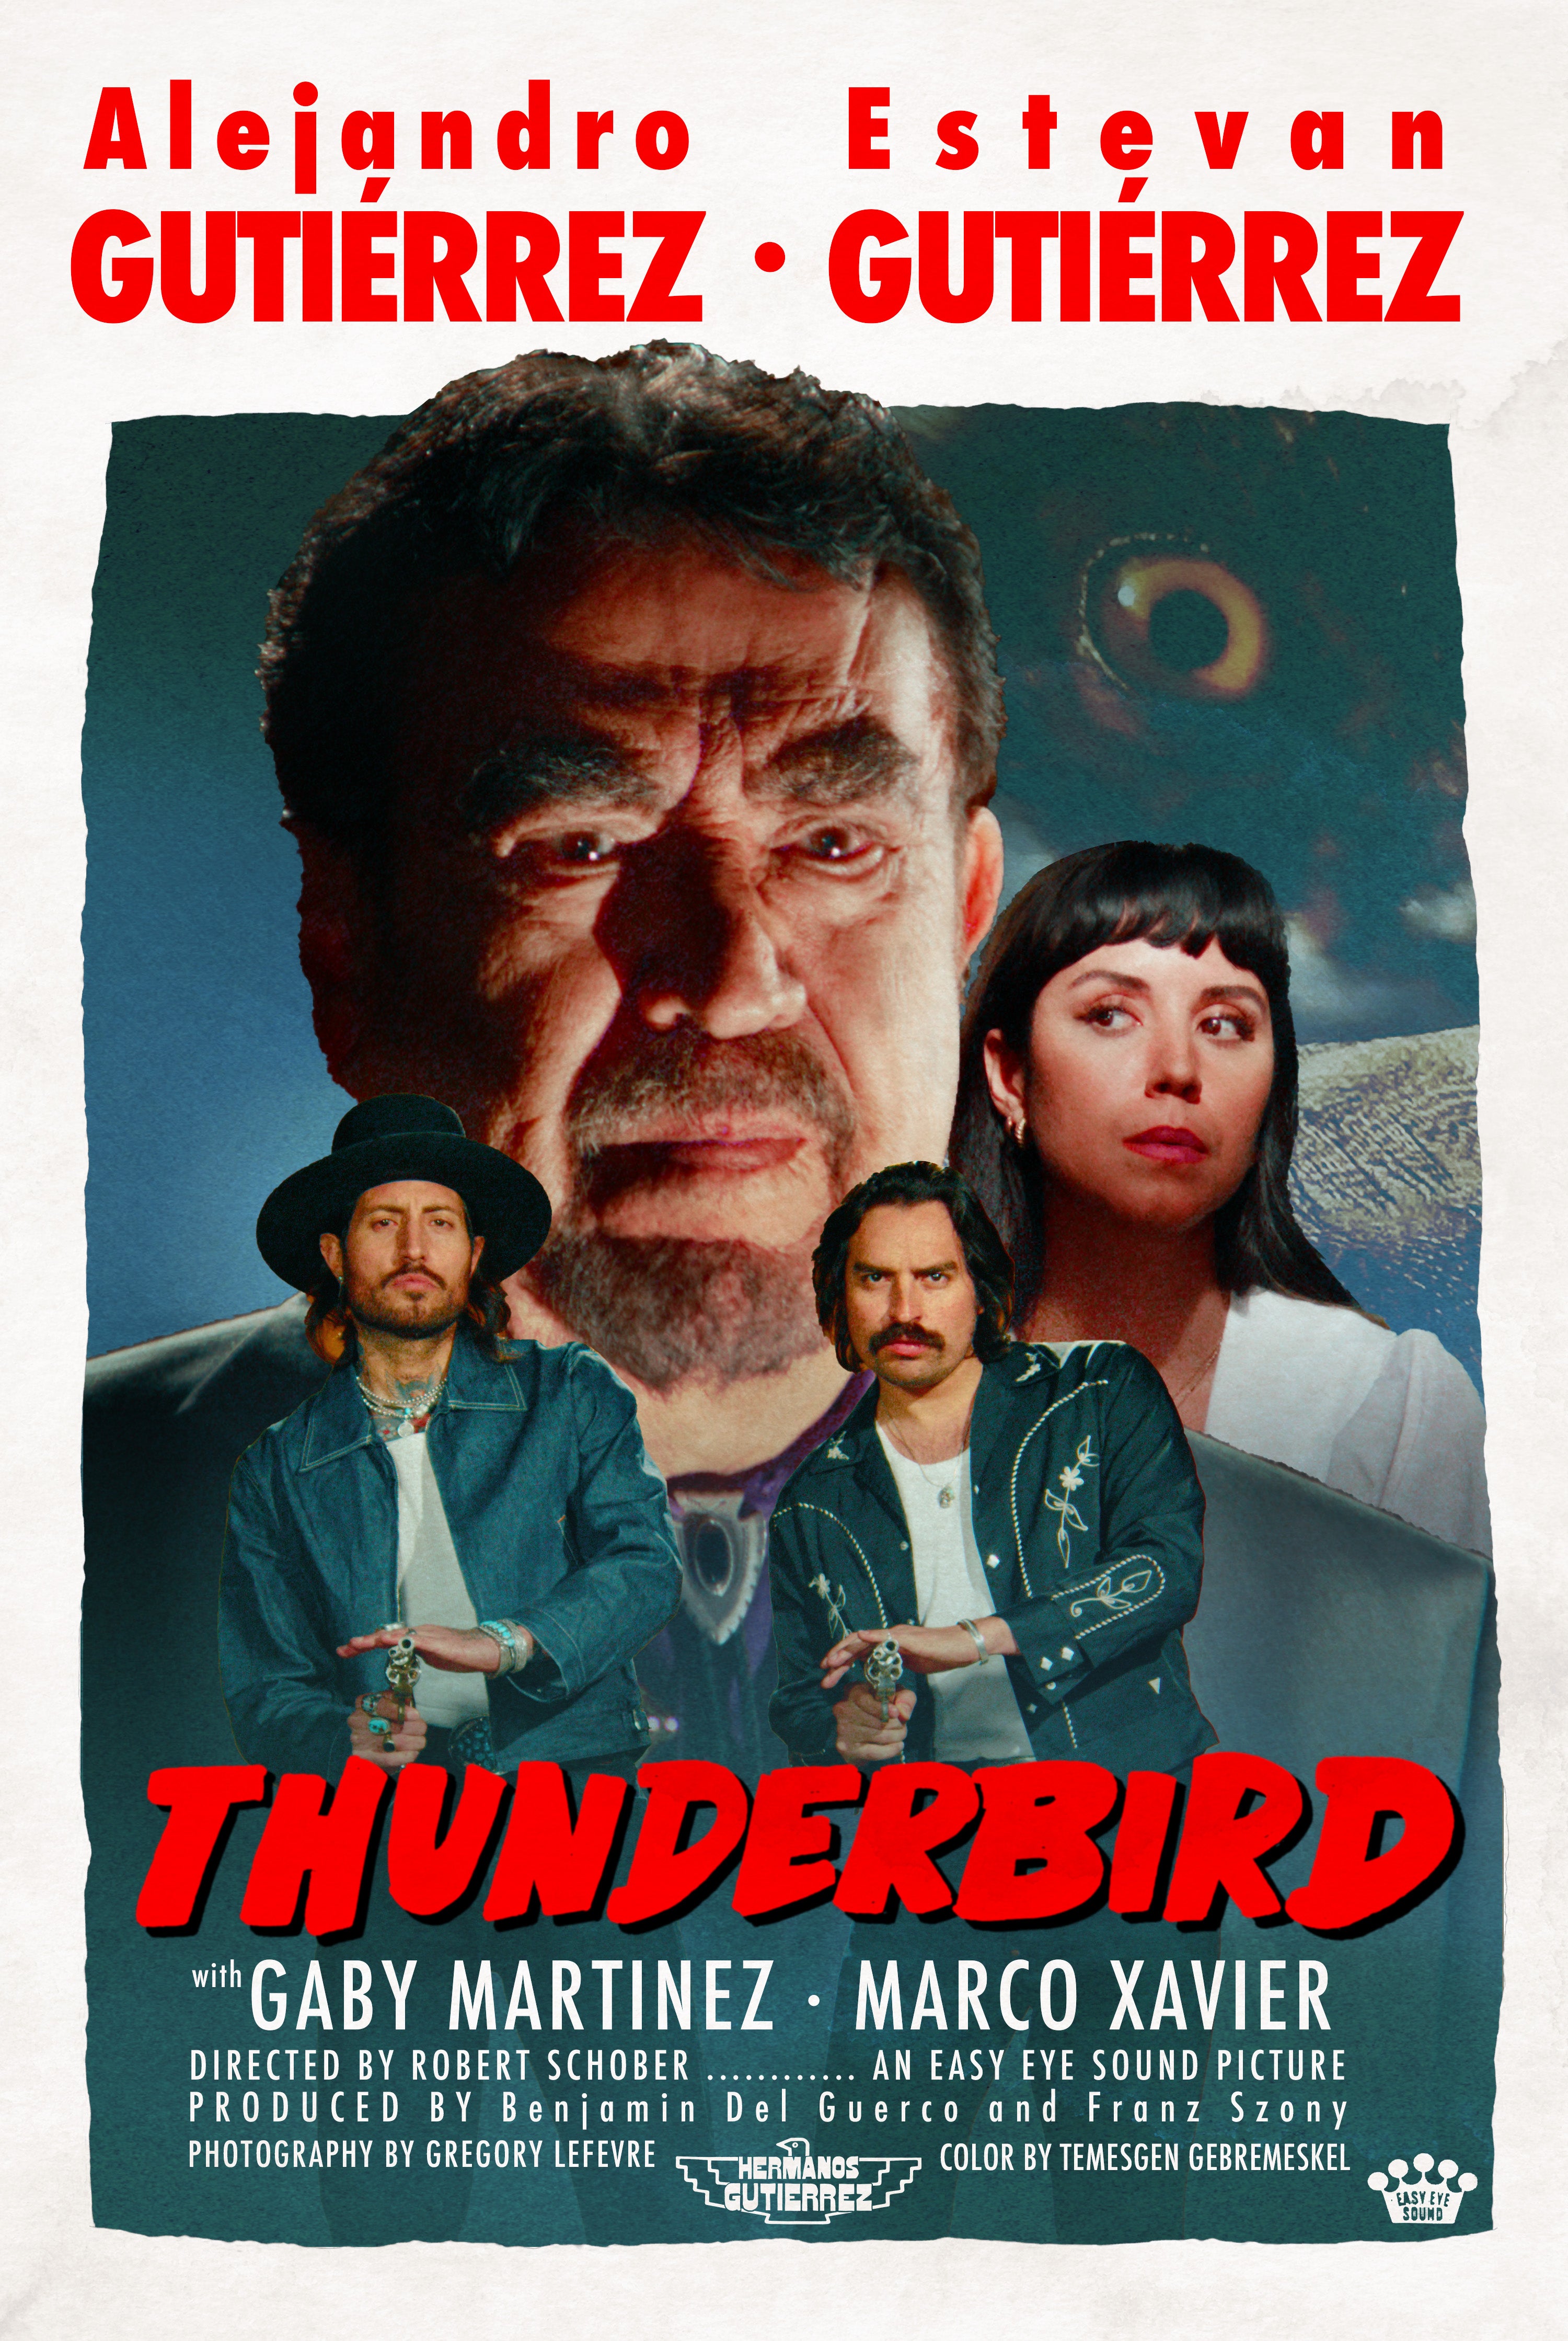 Watch the "Thunderbird" Official Music Video now!